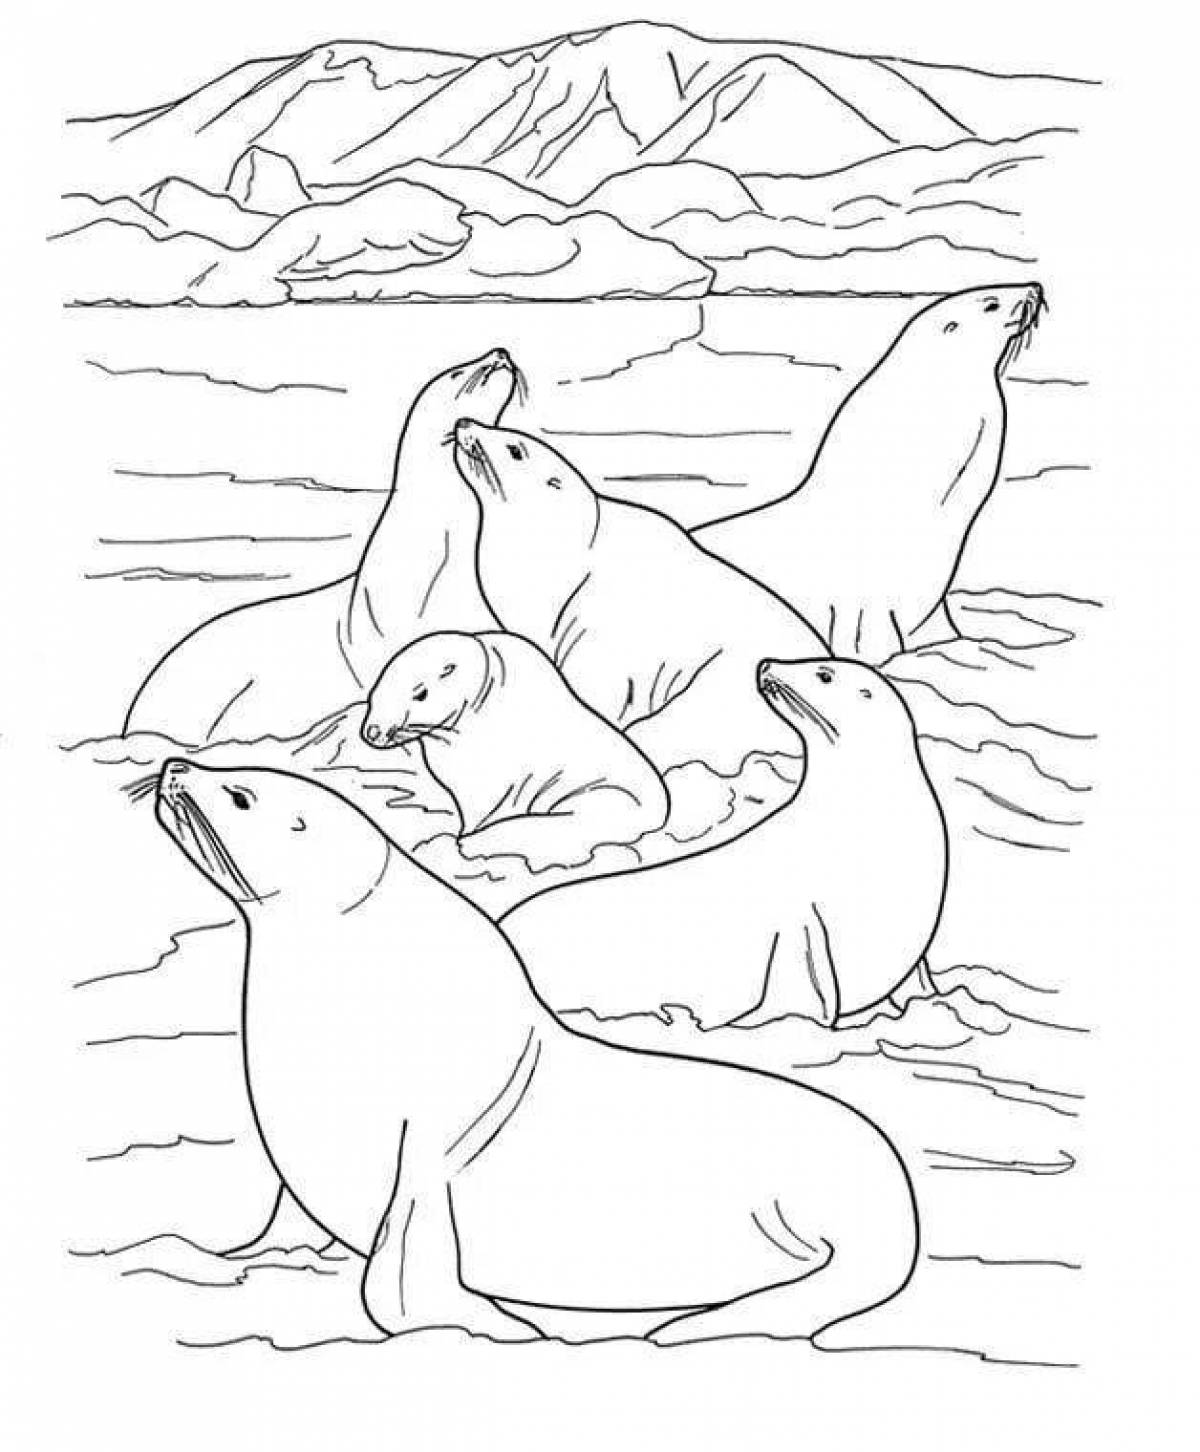 Gorgeous northern animal coloring book